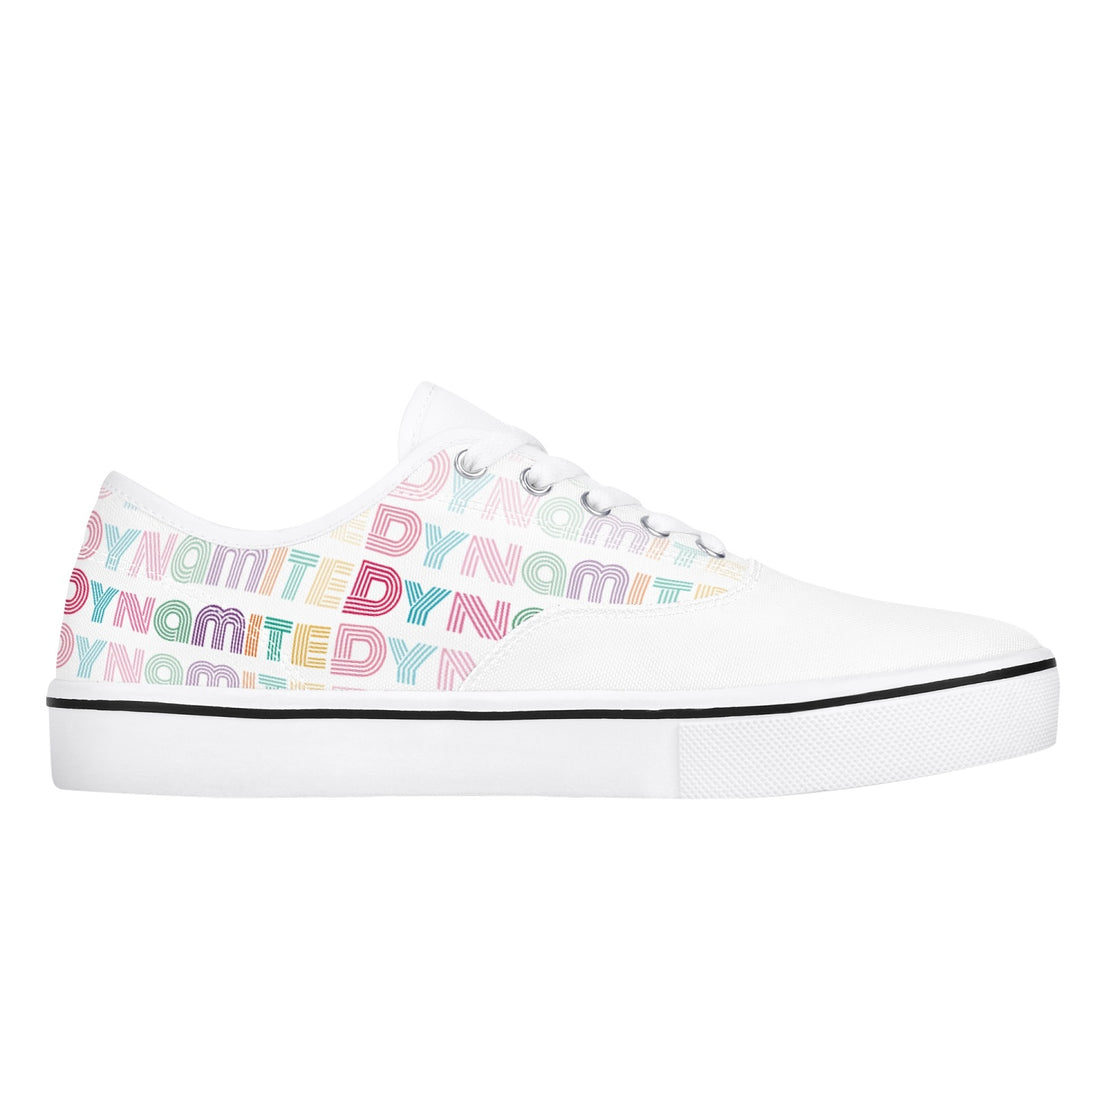 Dynamite Casual Sneaker Shoes